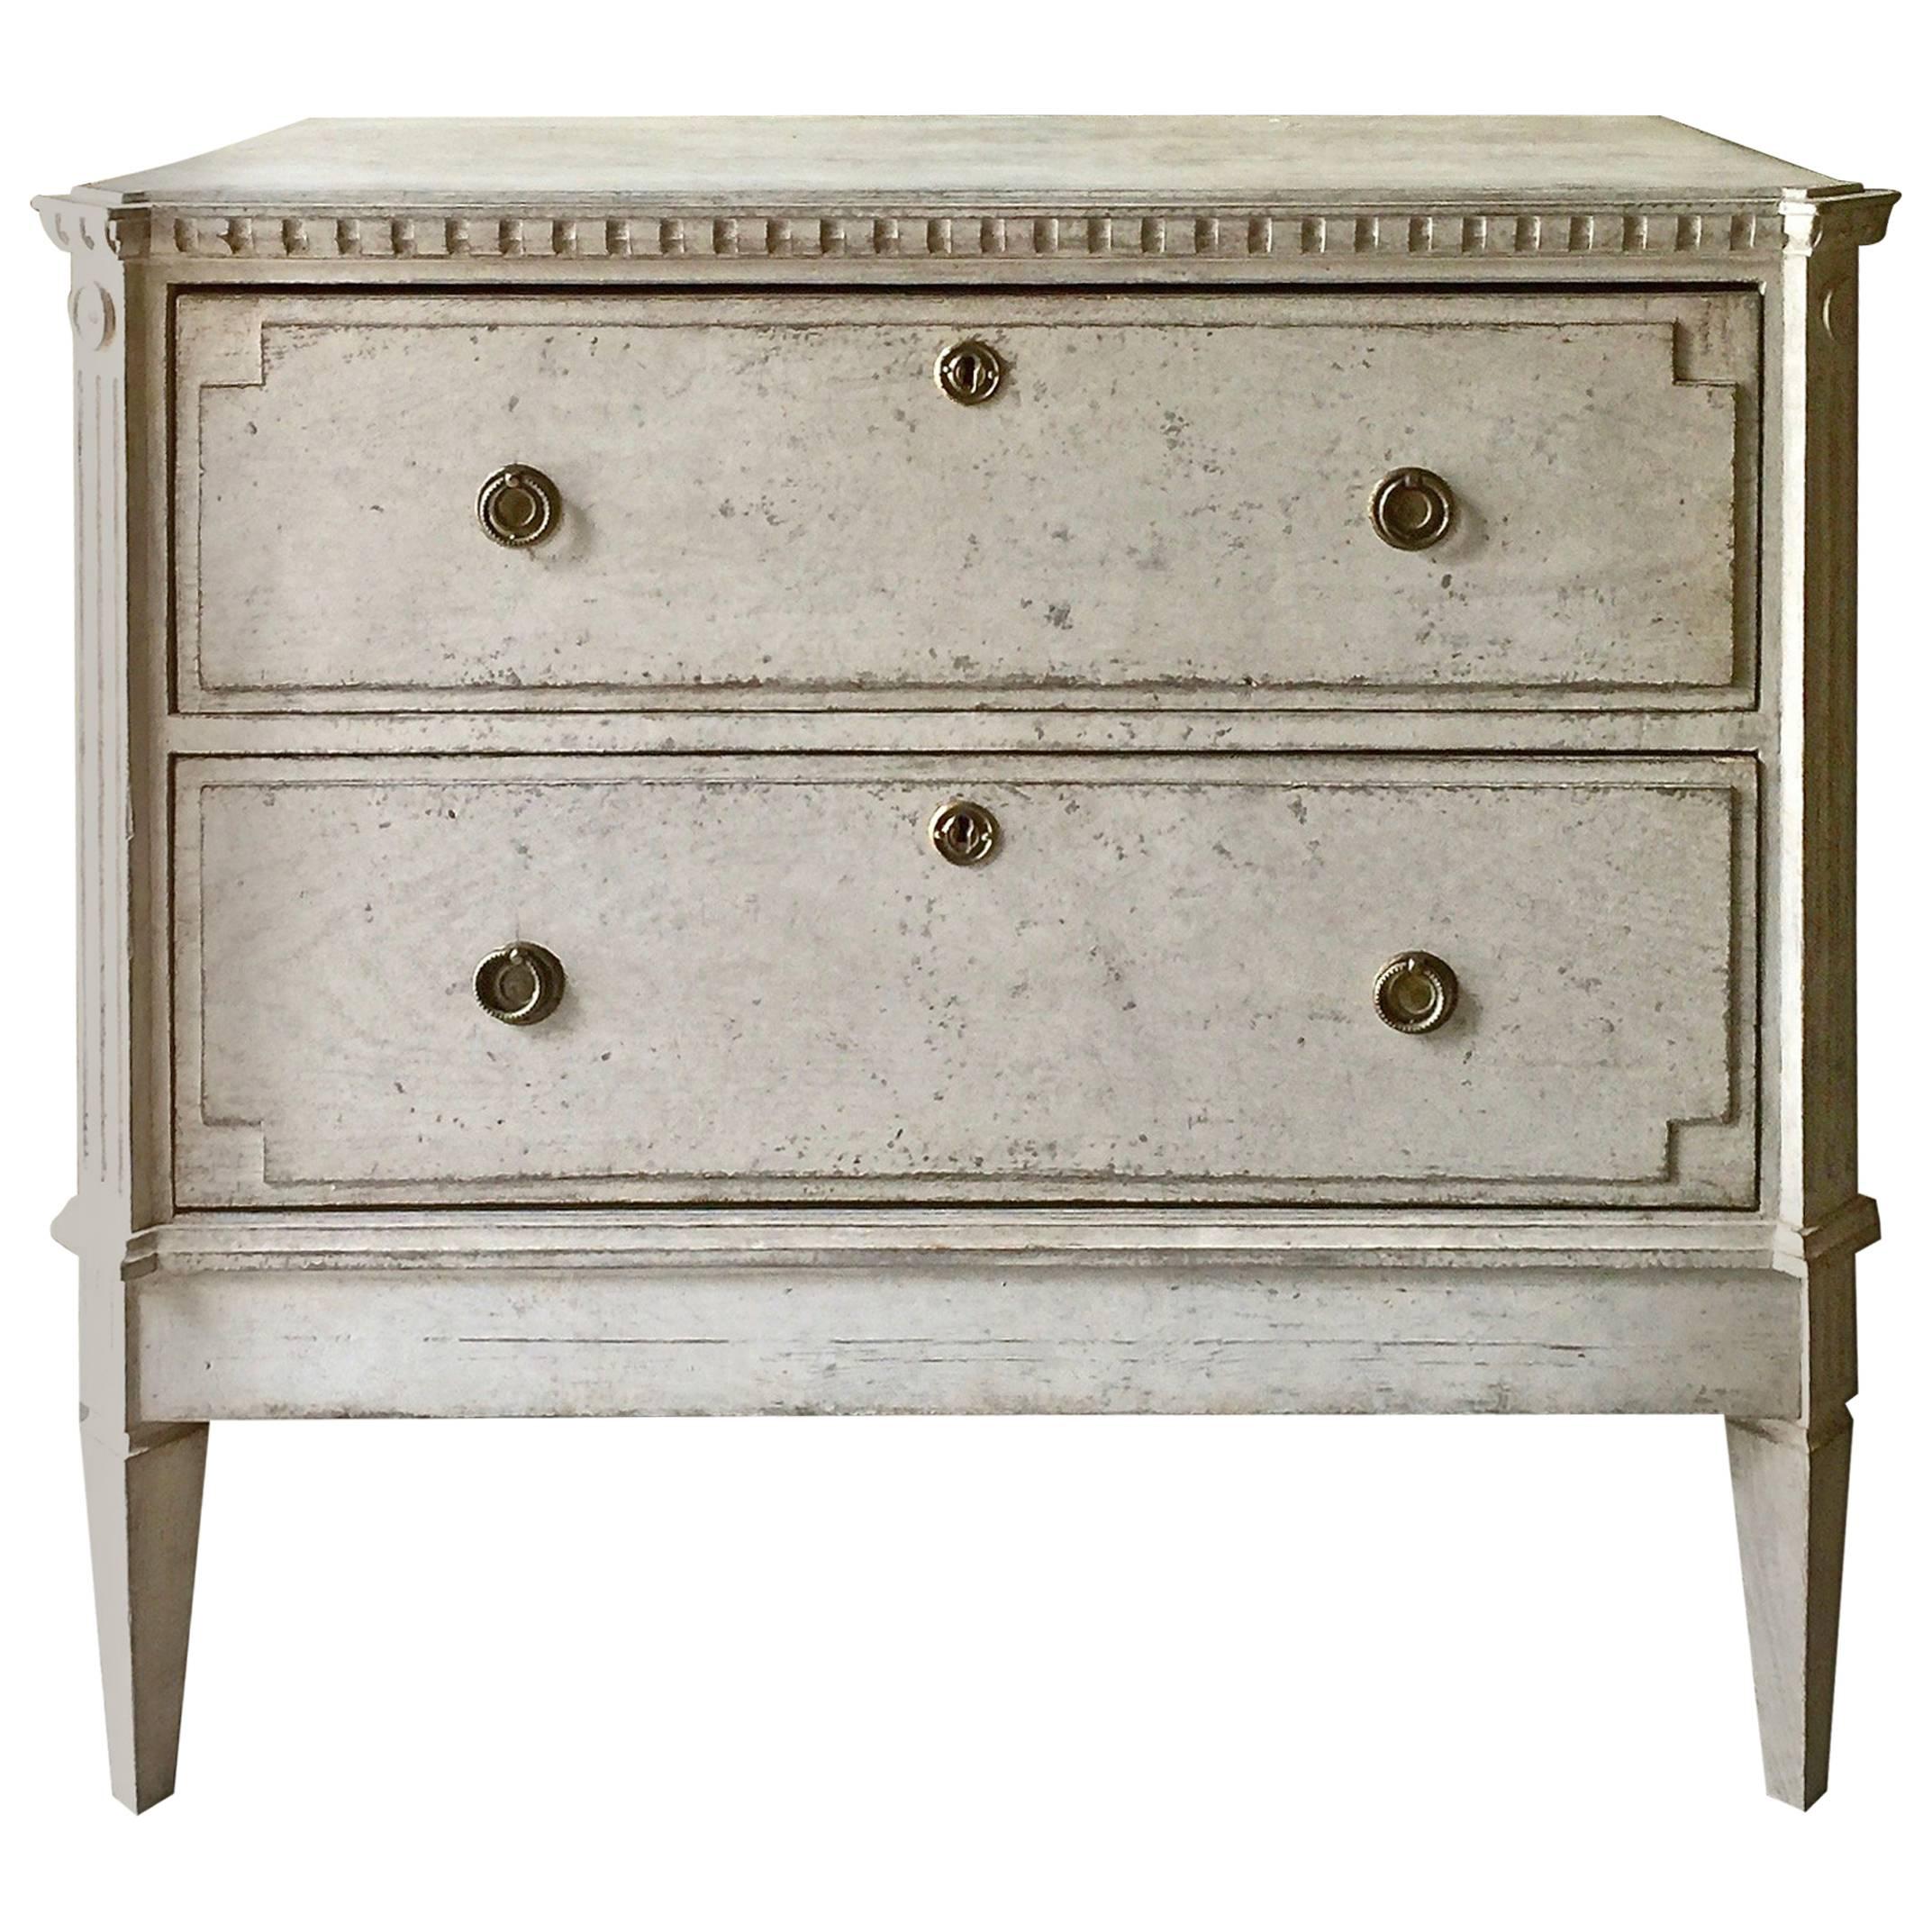 19th Century Gustavian Period Chest of Drawers